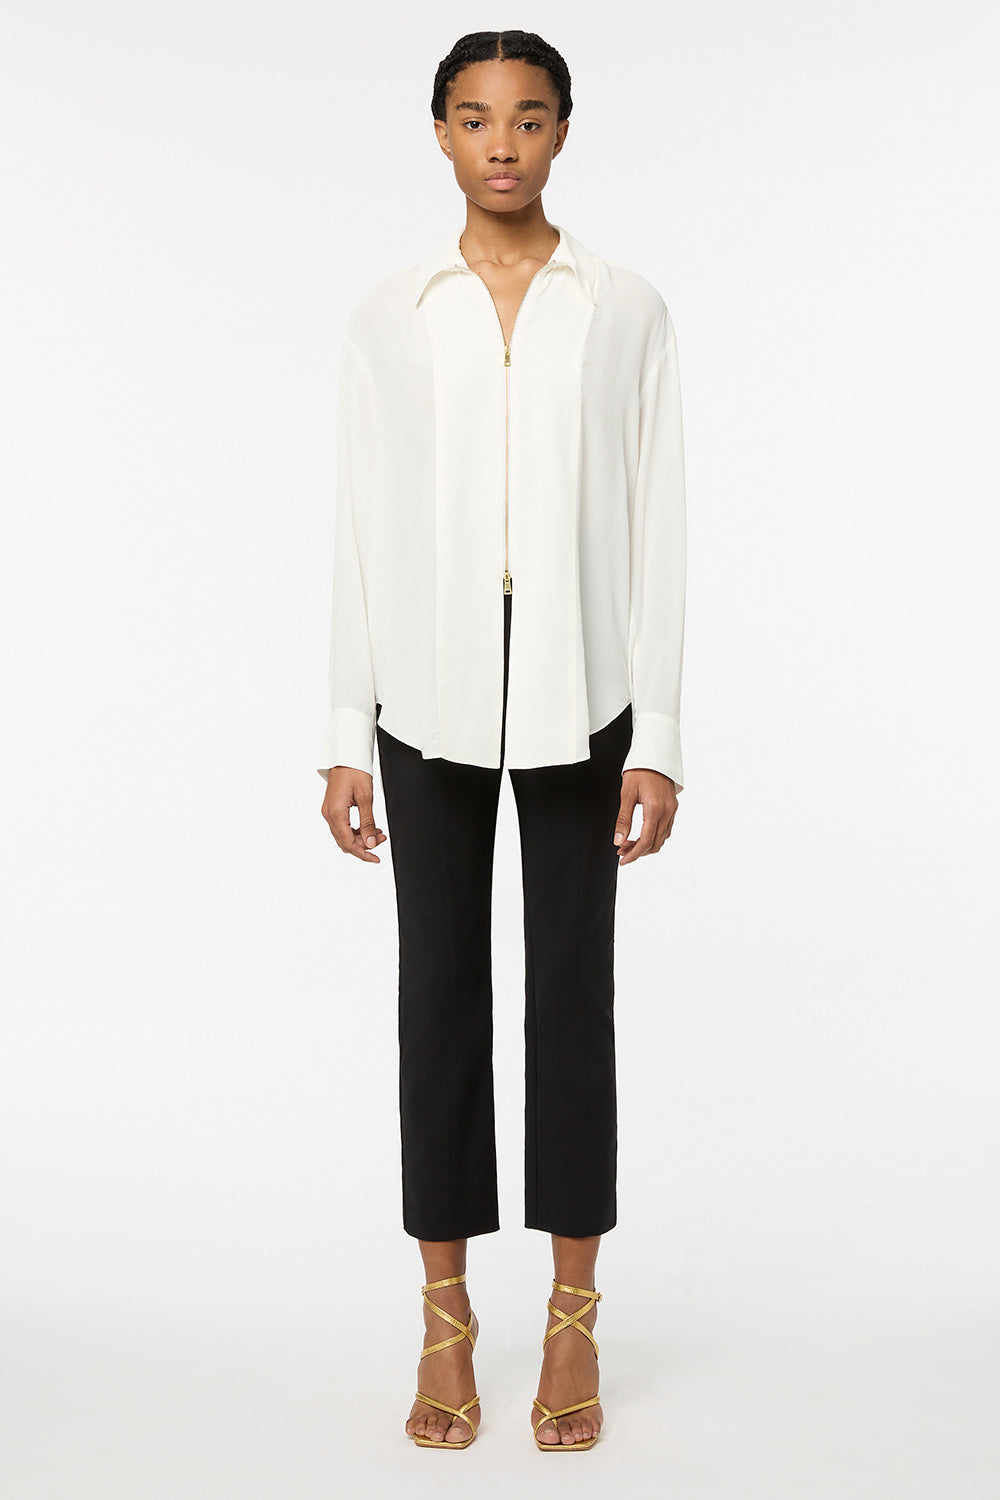 Hit Play Zip Blouse – MANNING CARTELL